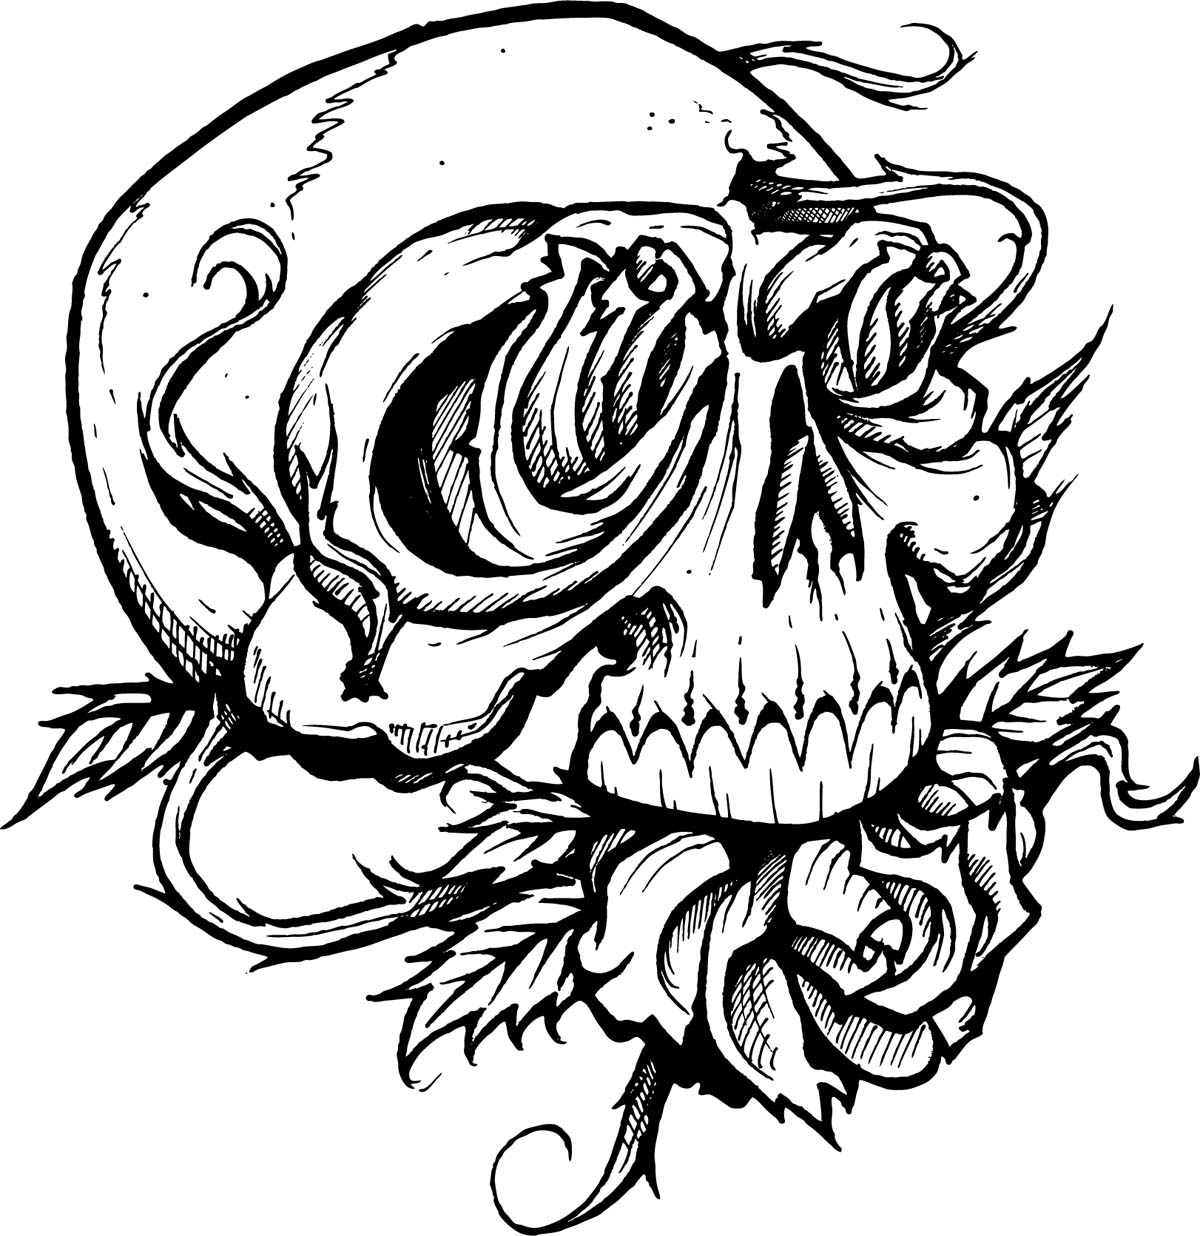 Skull coloring pages - Coloring Pages & Pictures - IMAGIXS